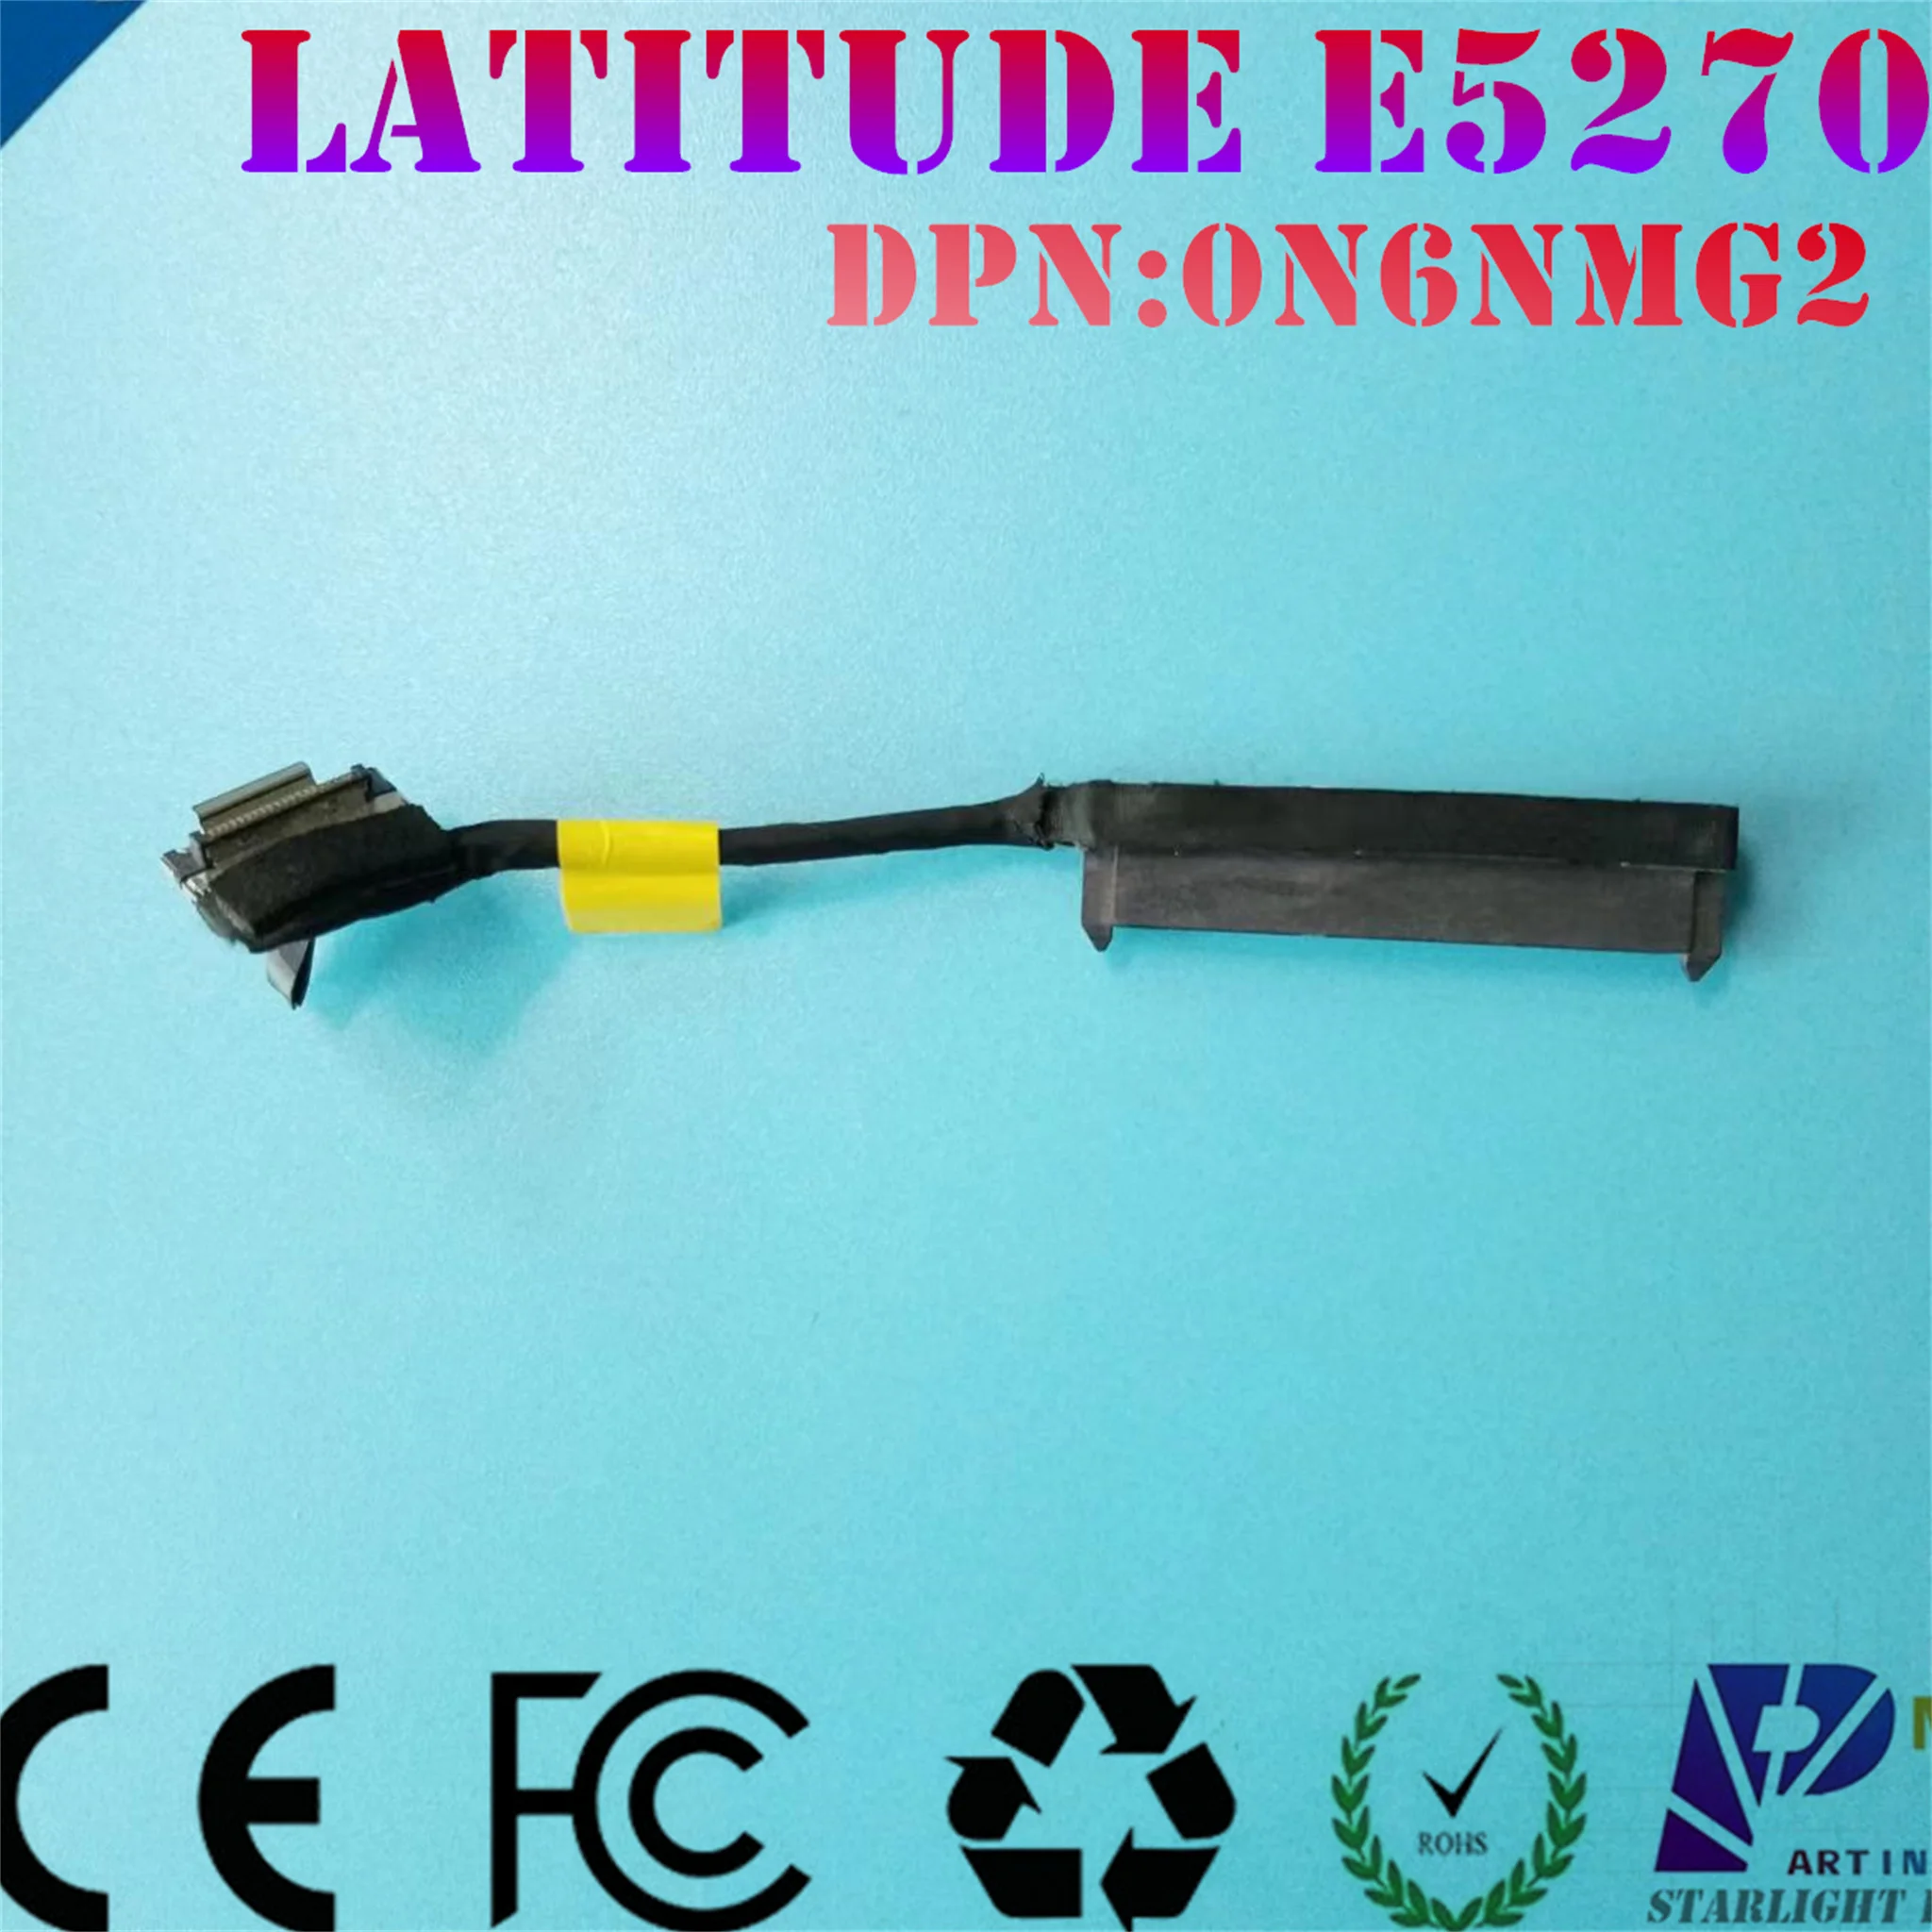 

New ORG laptop HDD cable connector for DELL LATITUDE E5270 5270 ADM60 series 0N6MG2 DC02C00B000